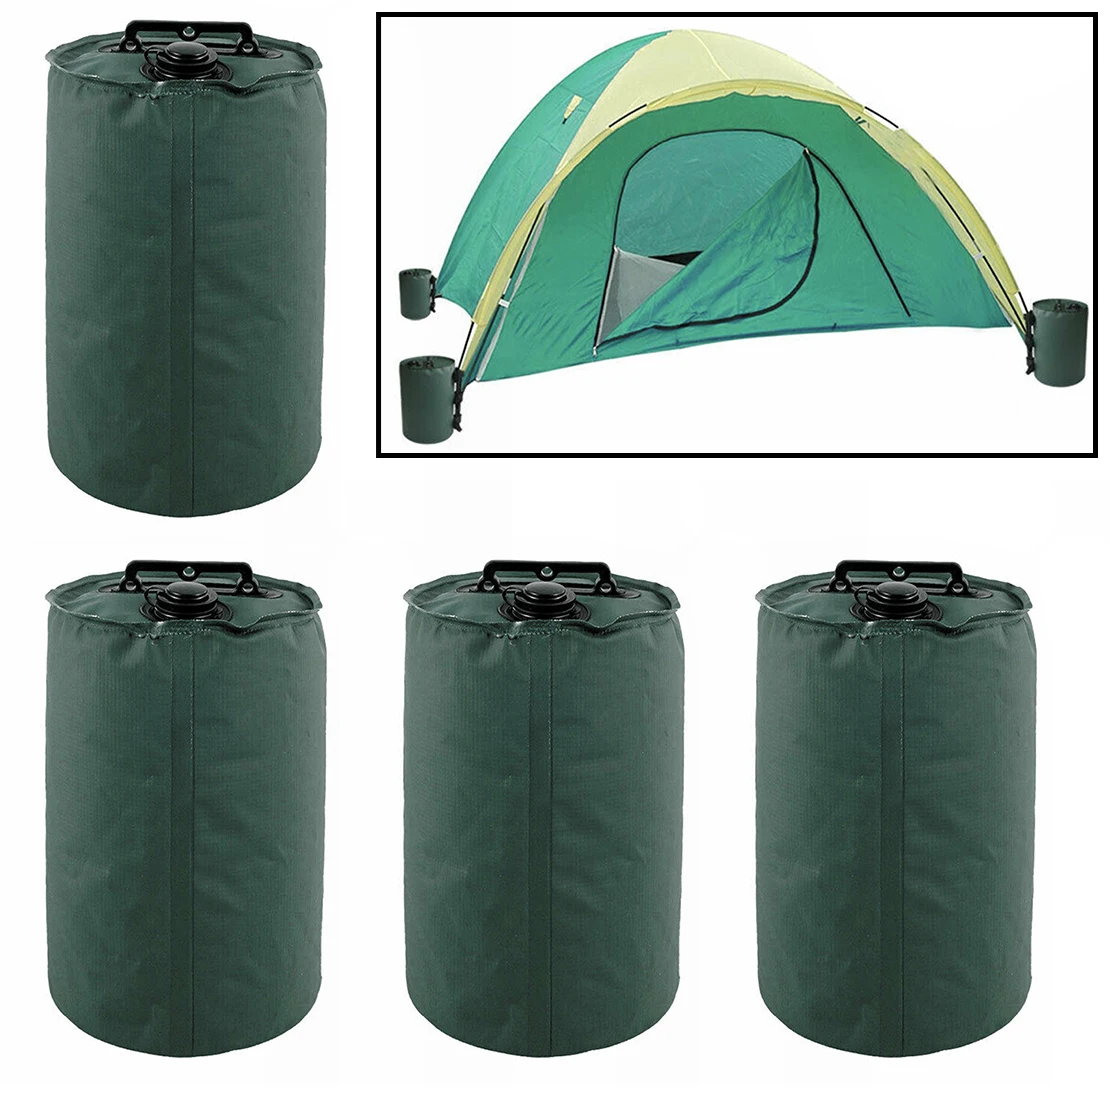 4Pcs Green Weight Water Sand Bag Large Capacity Tent Leg Foot for Outdoor Garden Gazebo Canopy Tripod Marquee Camping Awning